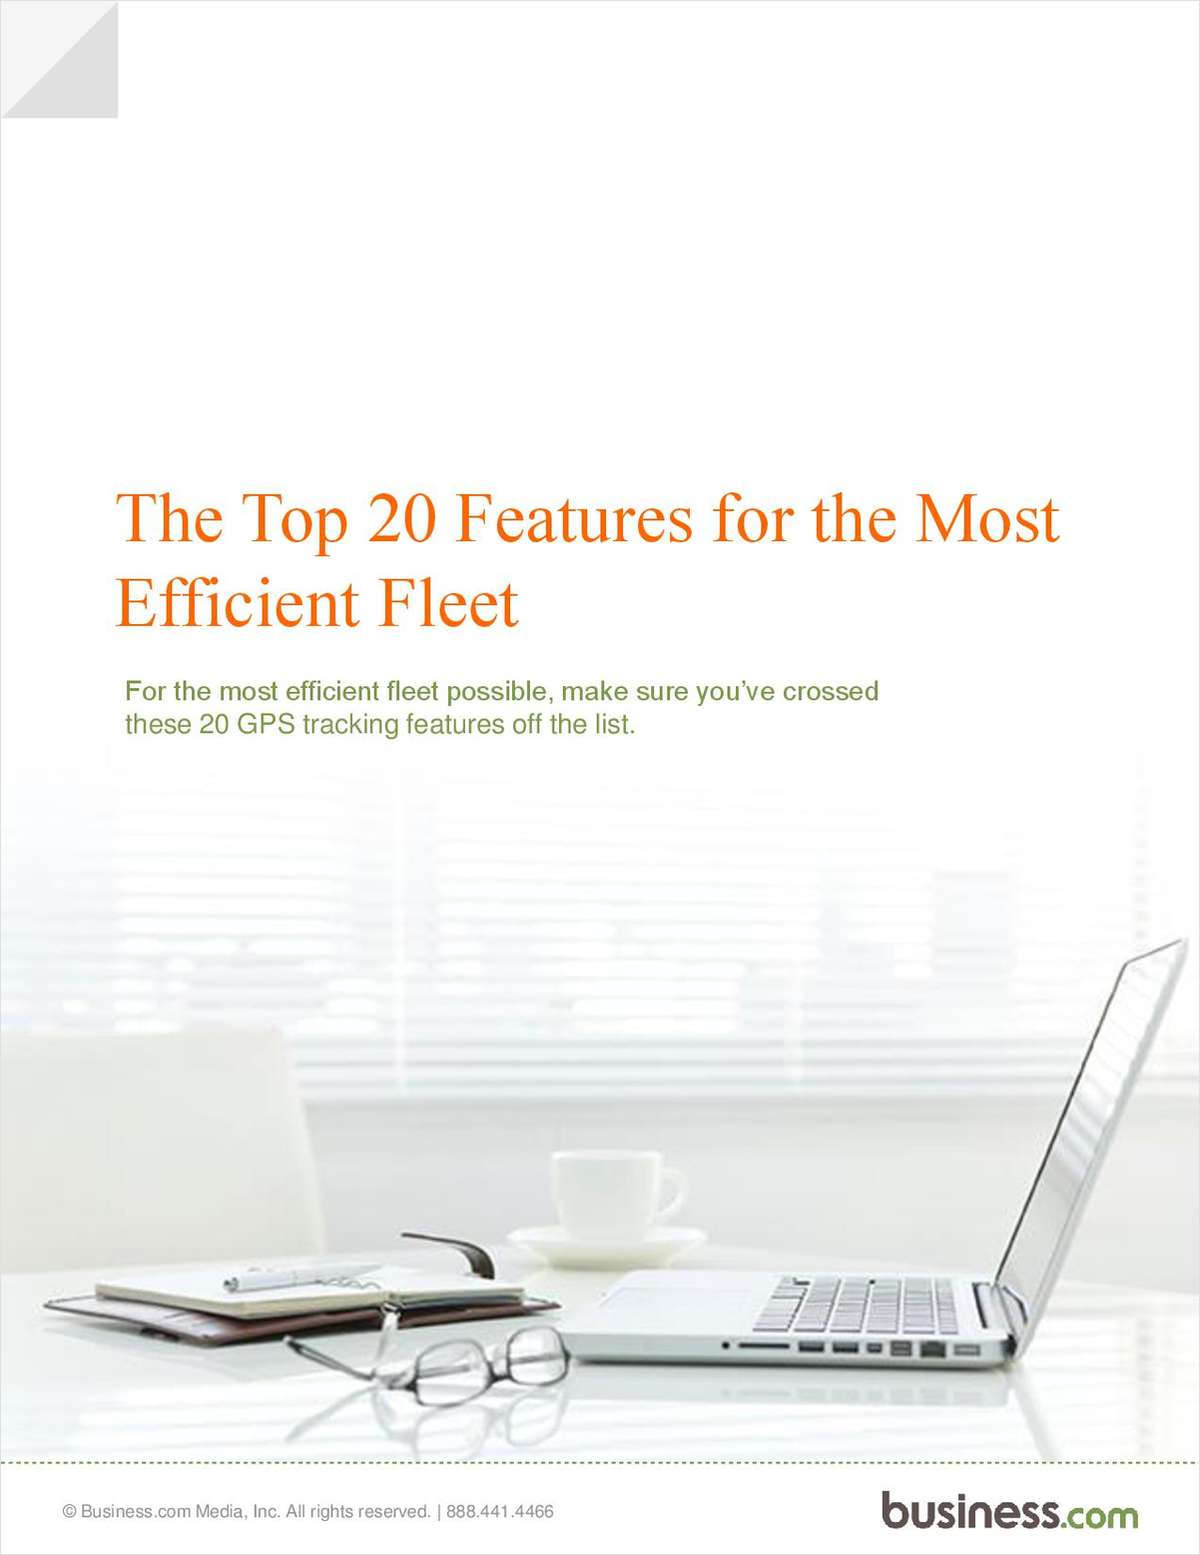 The Top 20 Features for the Most Efficient Fleet